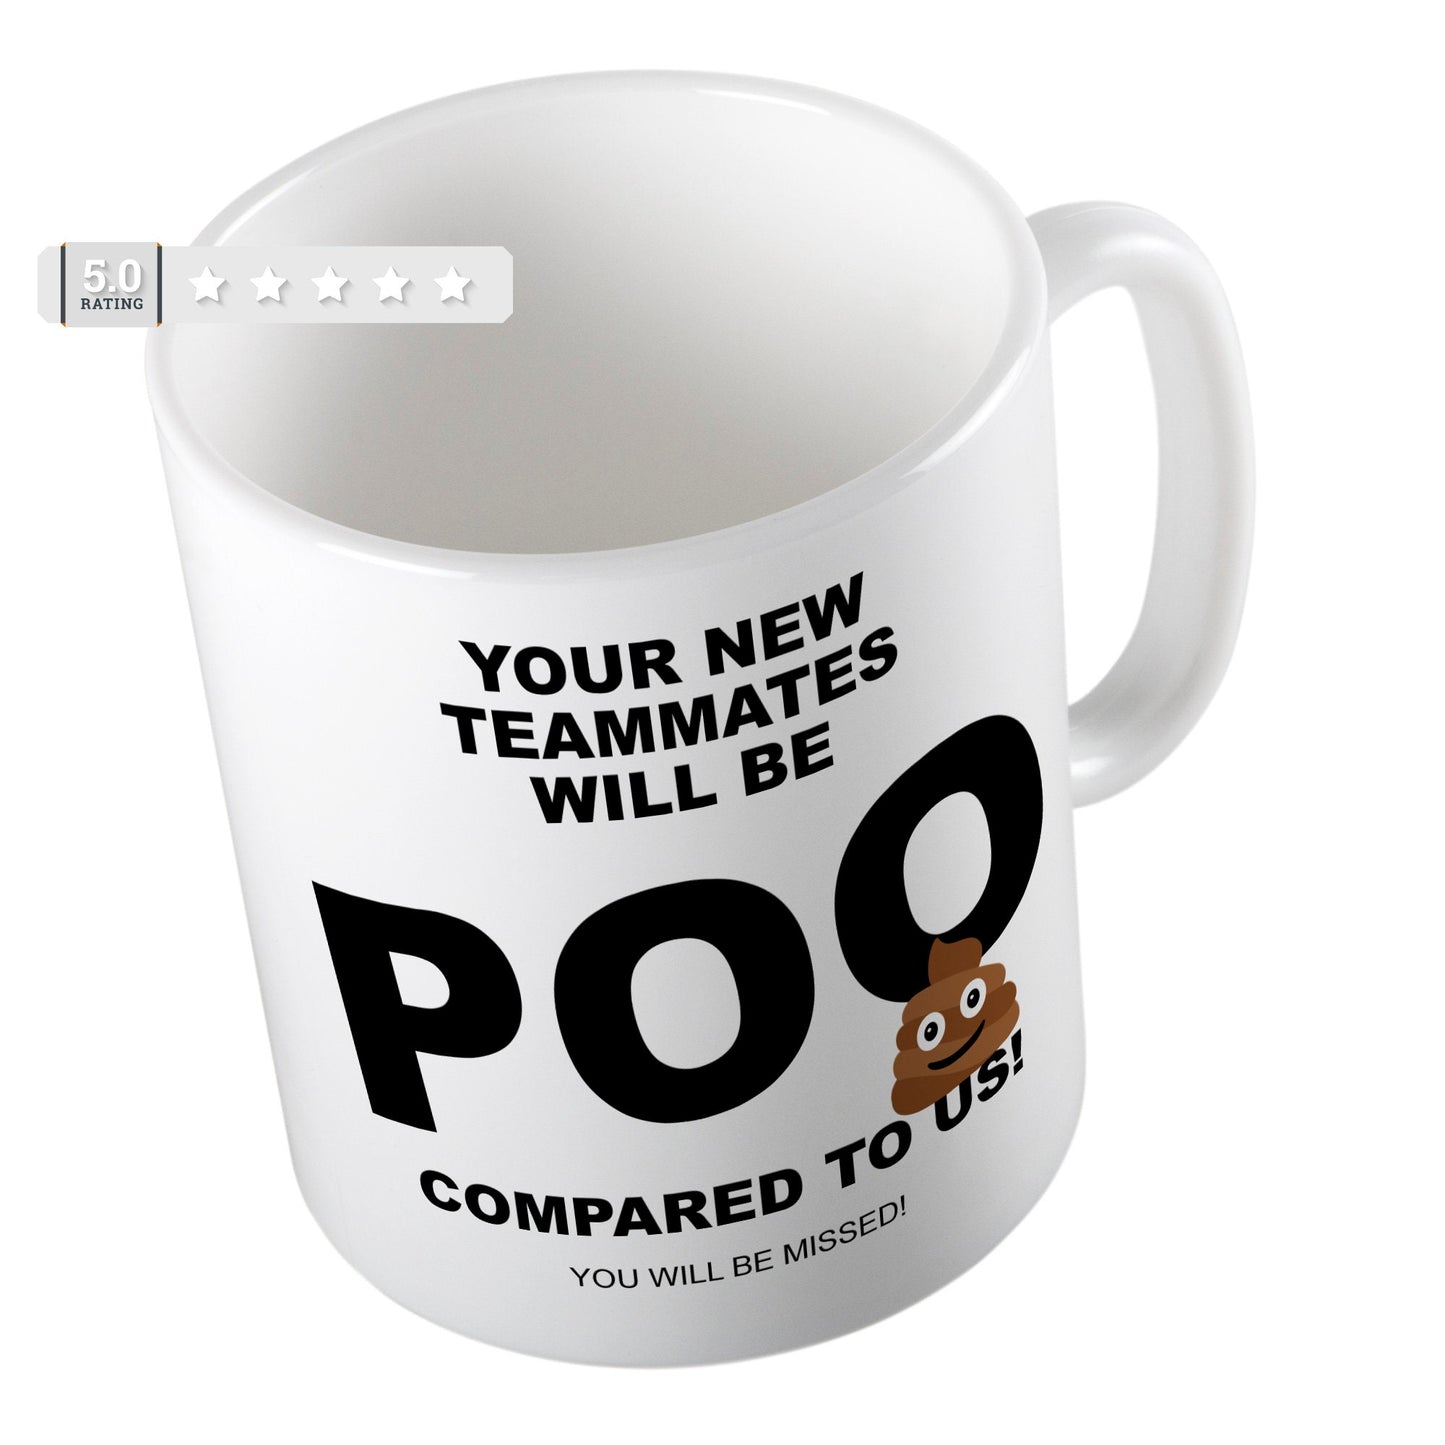 Funny leaving Gift Your new colleagues will be Poo compared to us Leaving Work Mug Great Leaving Gifts